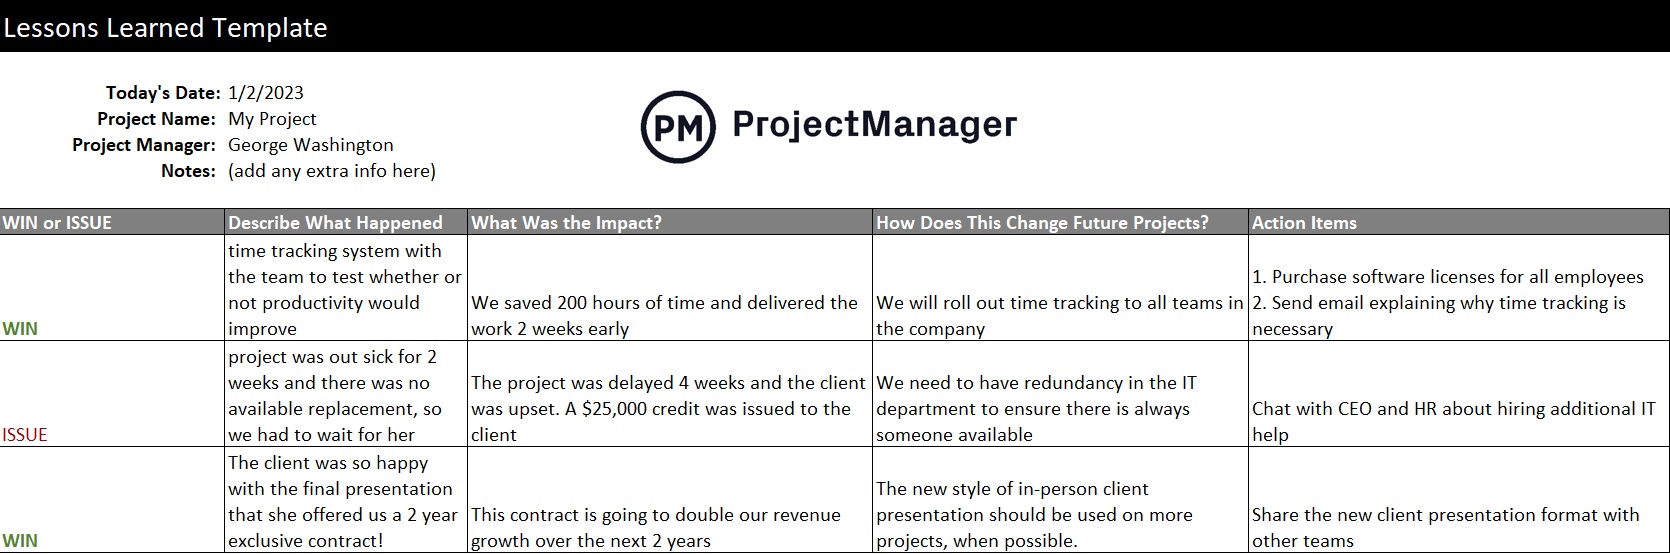 ProjectManager's free lessons learned template